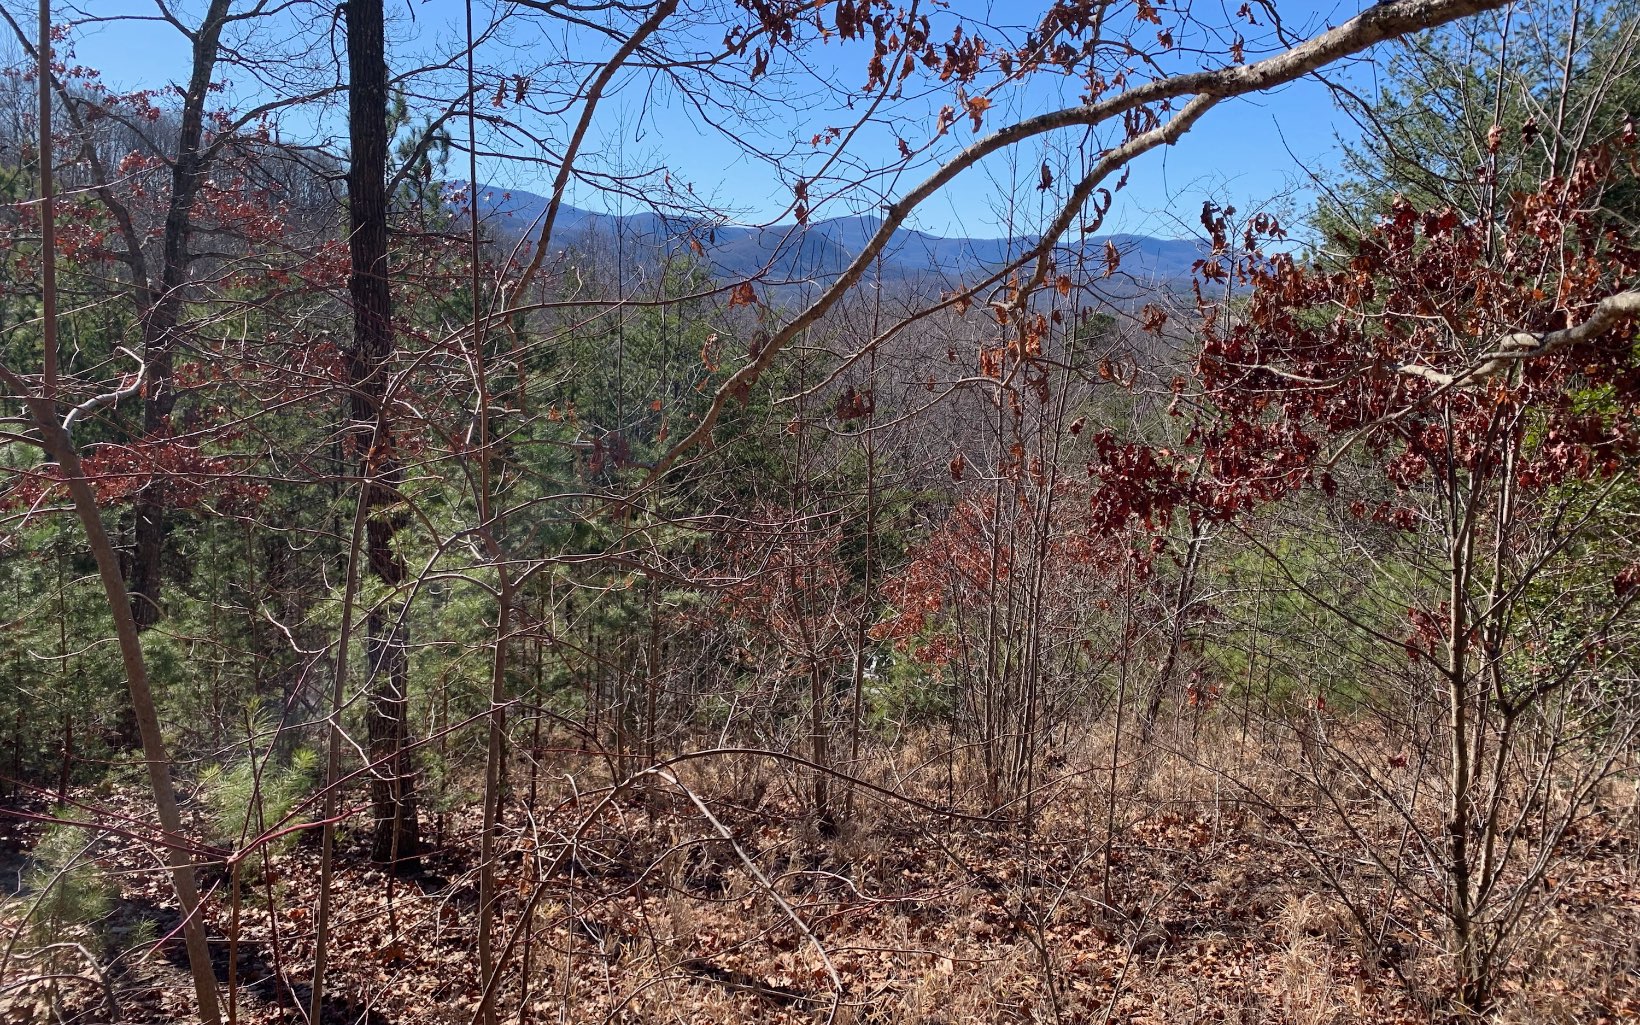 Gorgeous Mountain View Lot within a mile from Downtown Blairsville. Great Building Site! Paved Roads. Previously permitted for 3-4 bedrooms. Driveway is in. Excellent building site. Underground utilities and public water.